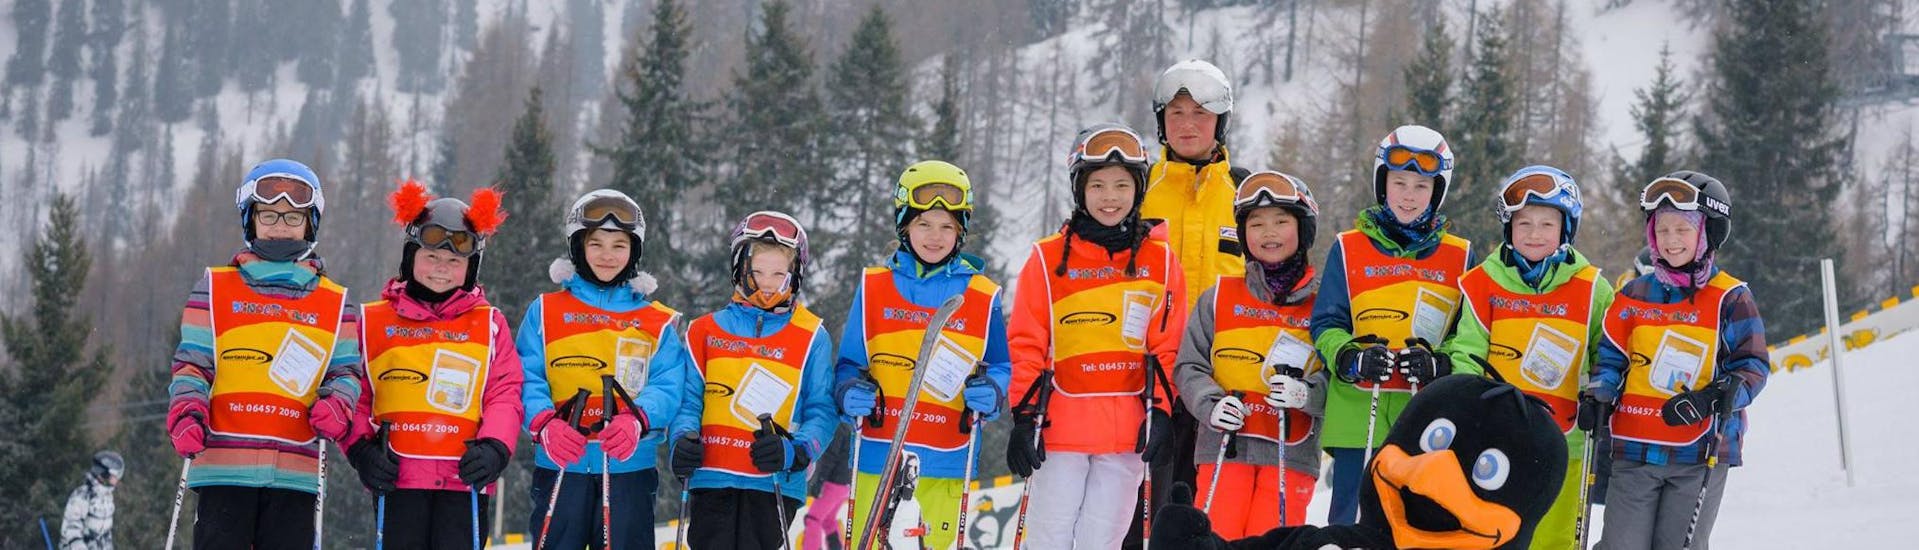 Ski Lessons for Kids & Teens (6-14 years) - With Experience.